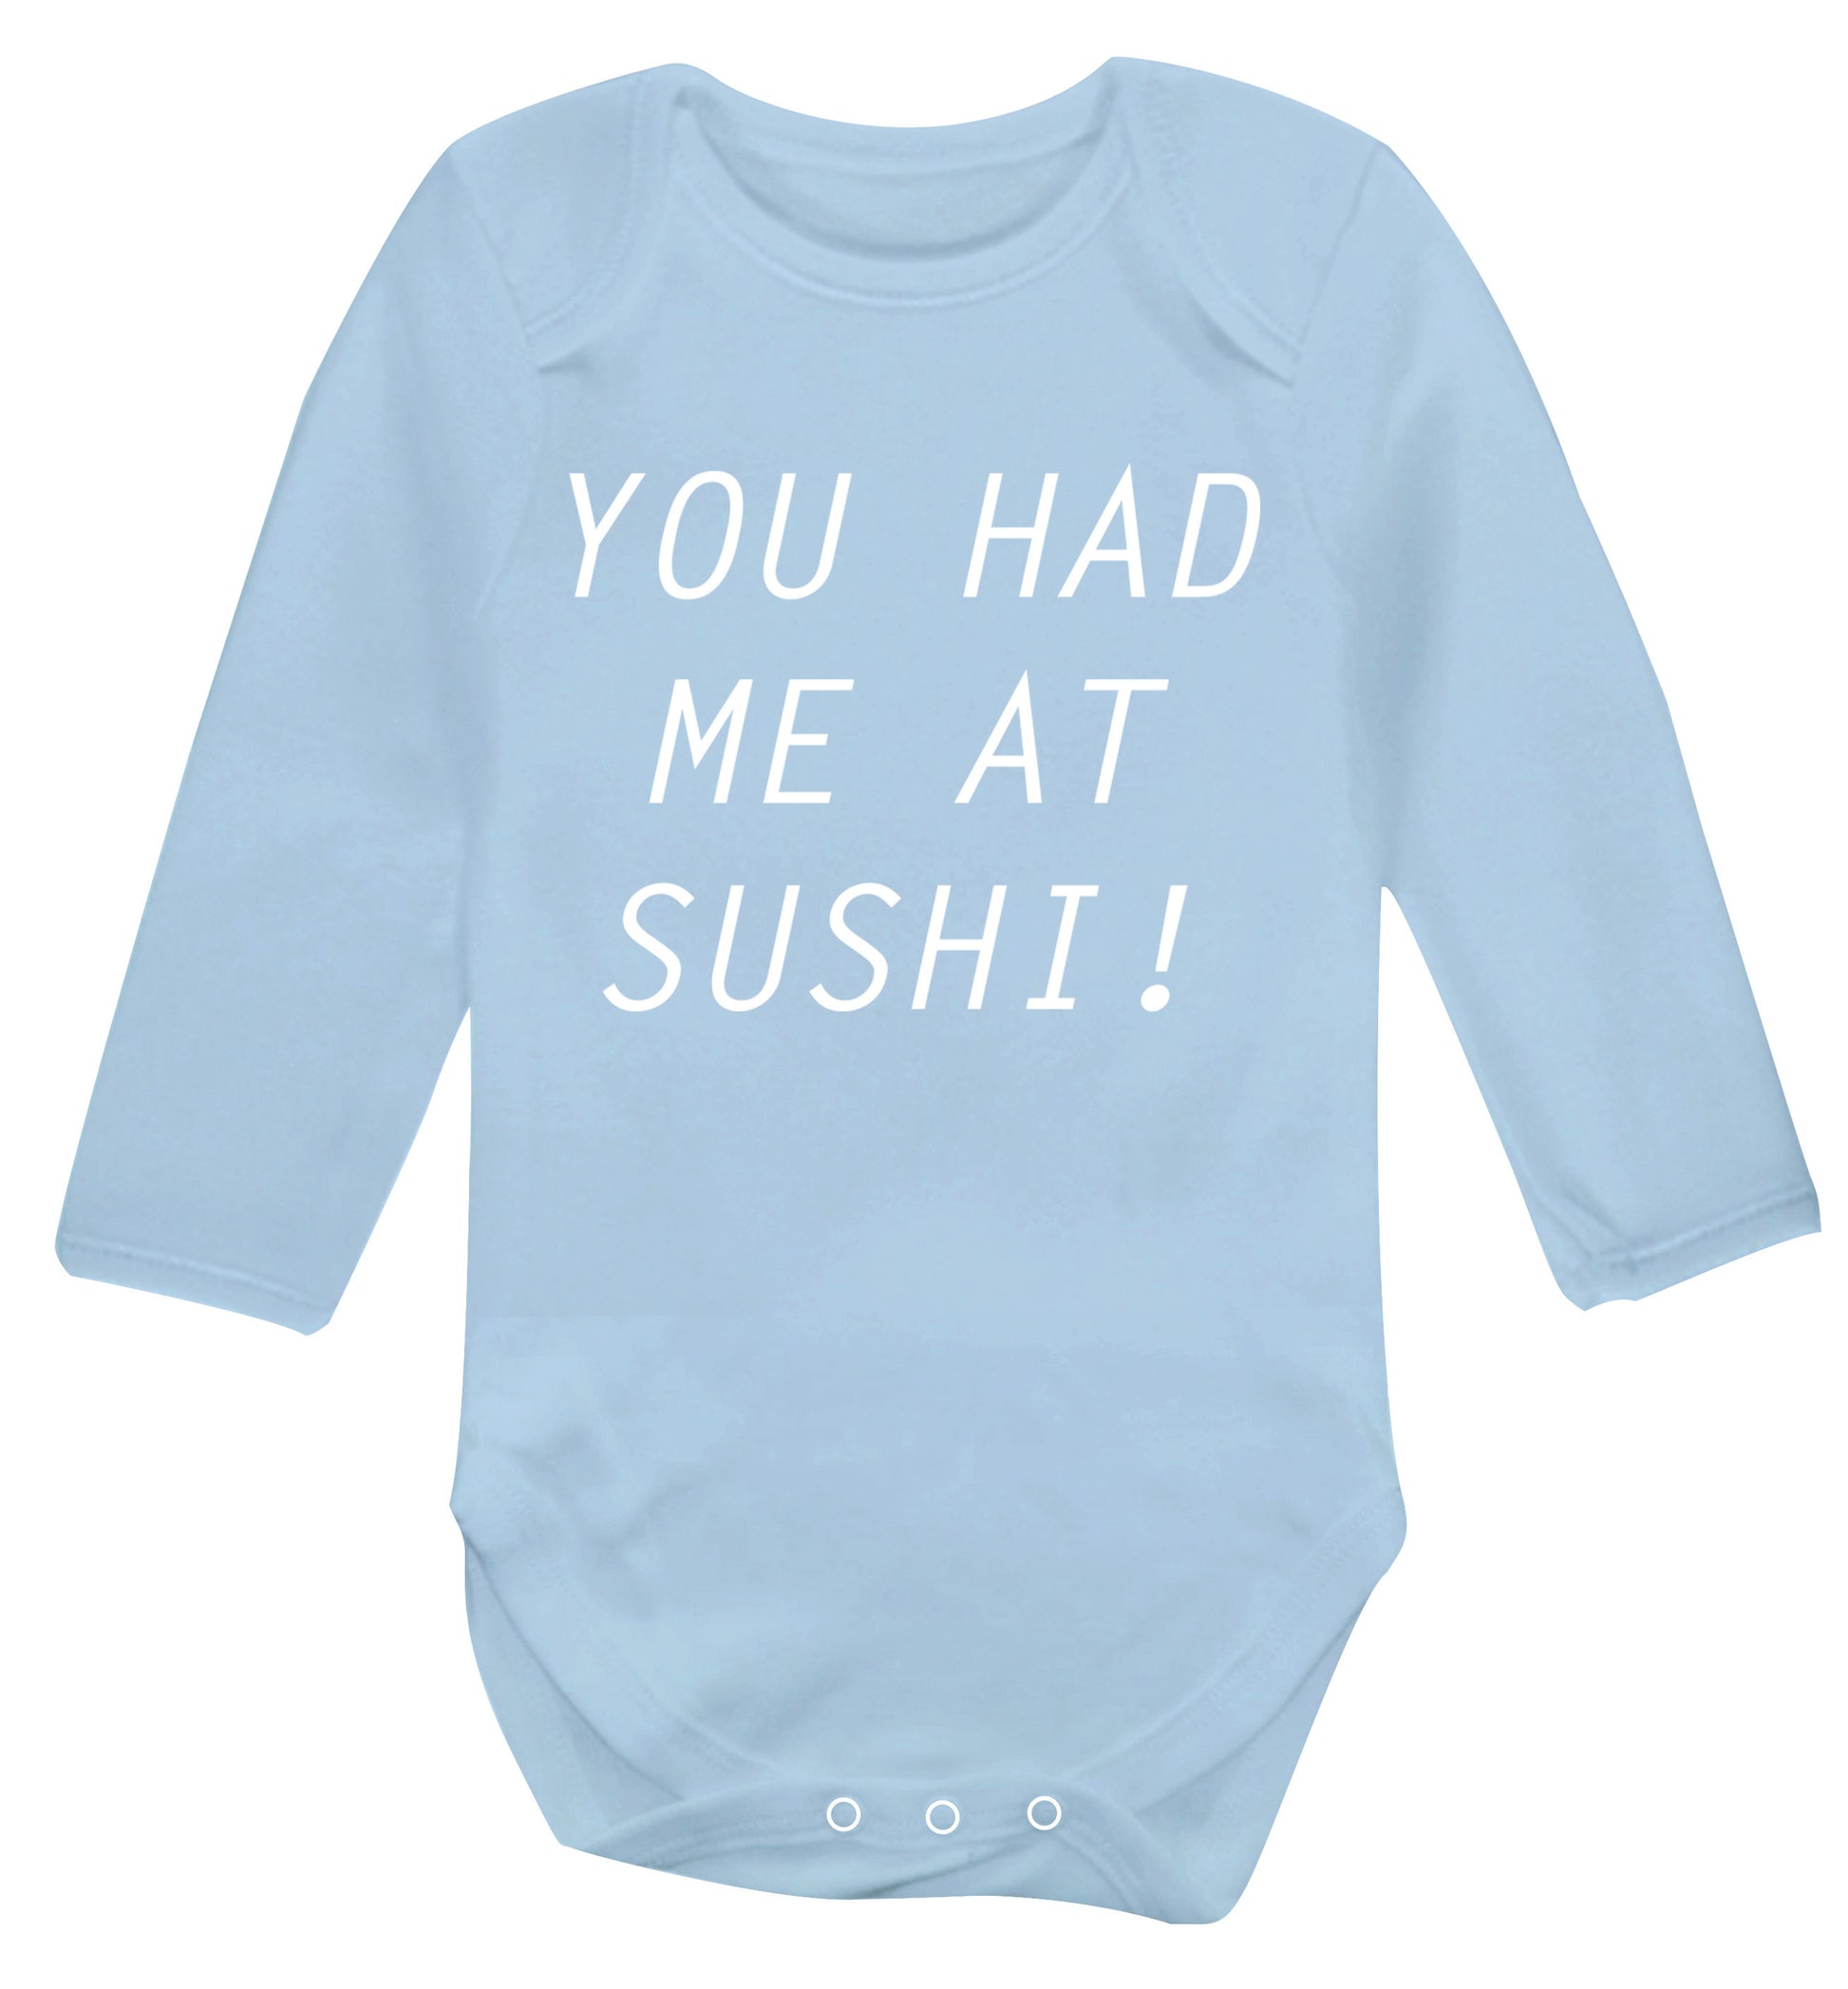 You had me at sushi Baby Vest long sleeved pale blue 6-12 months